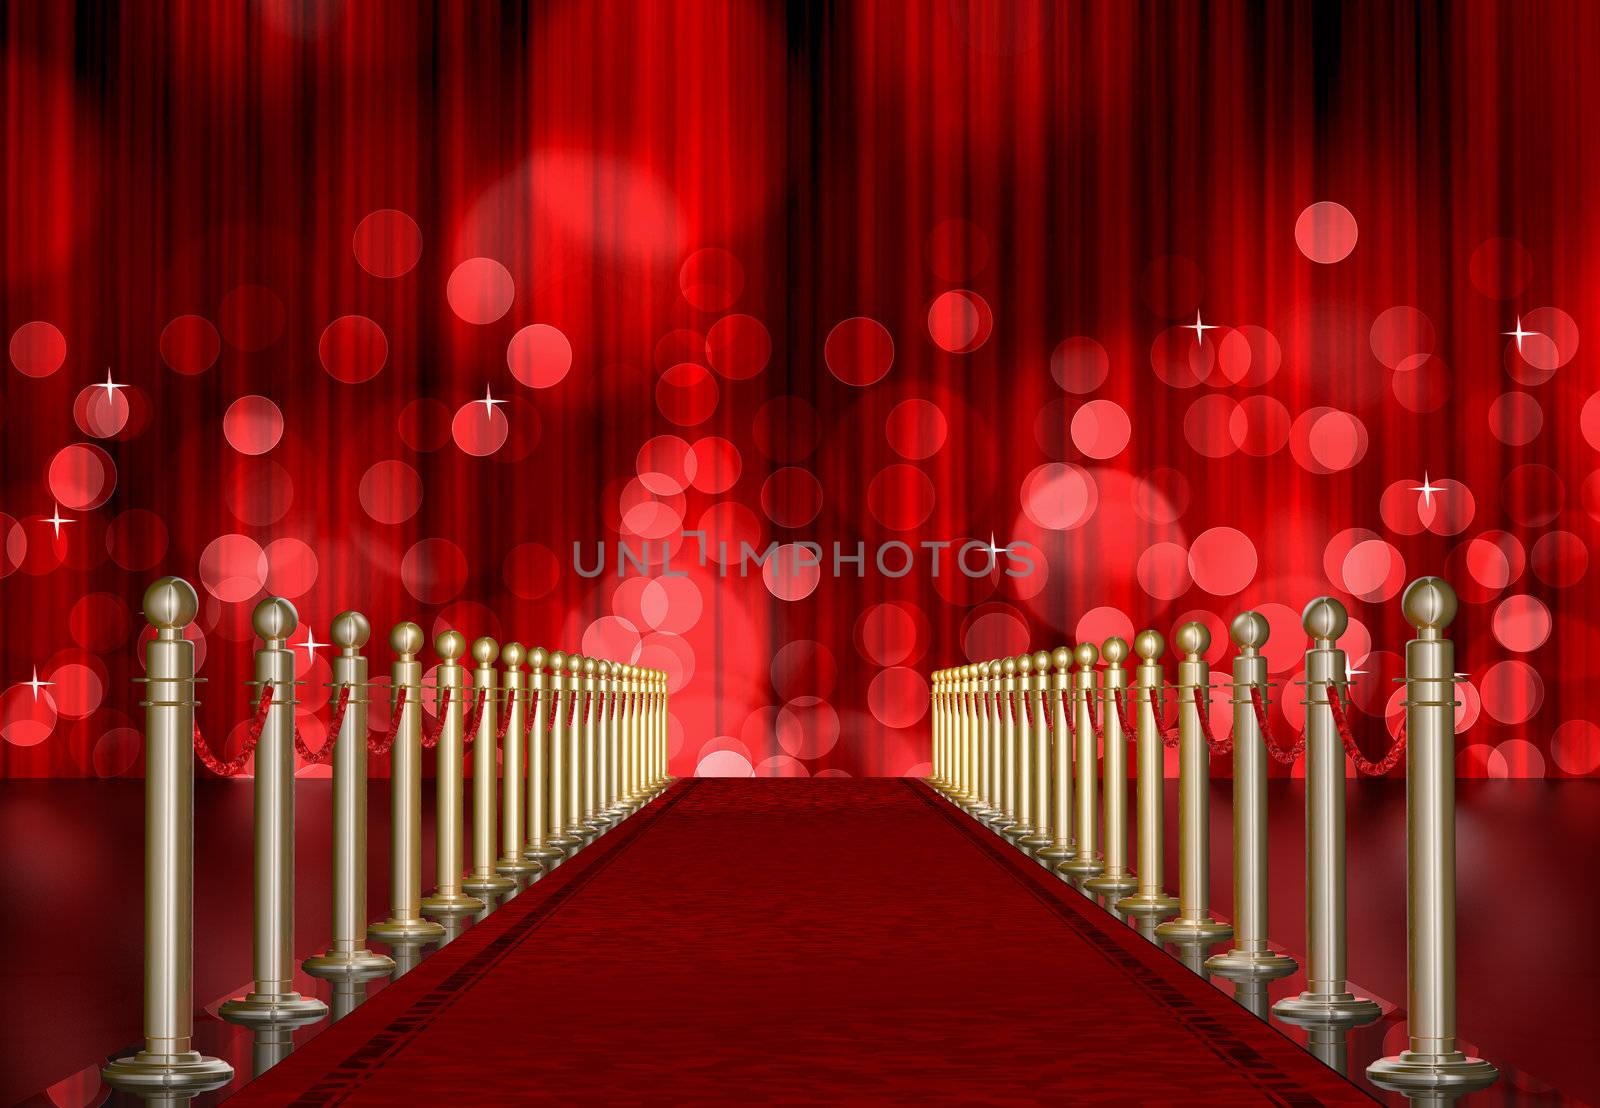 red carpet entrance with the stanchions and the ropes. red Light Burst over curtain